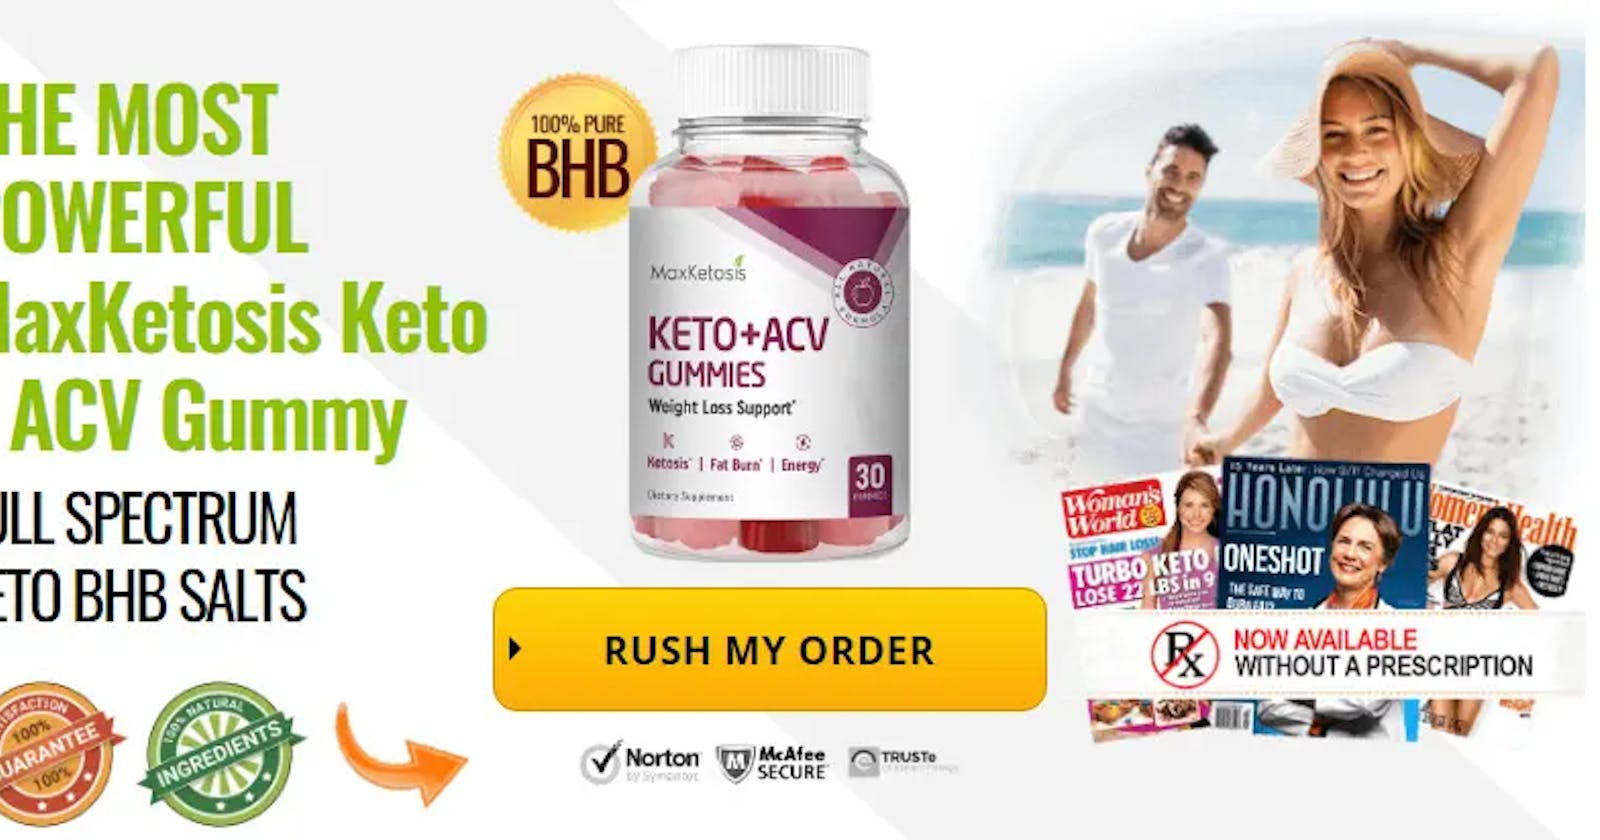 Max Ketosis Keto ACV Gummies (Customers Review) Price, Benefit and Where to Buy?